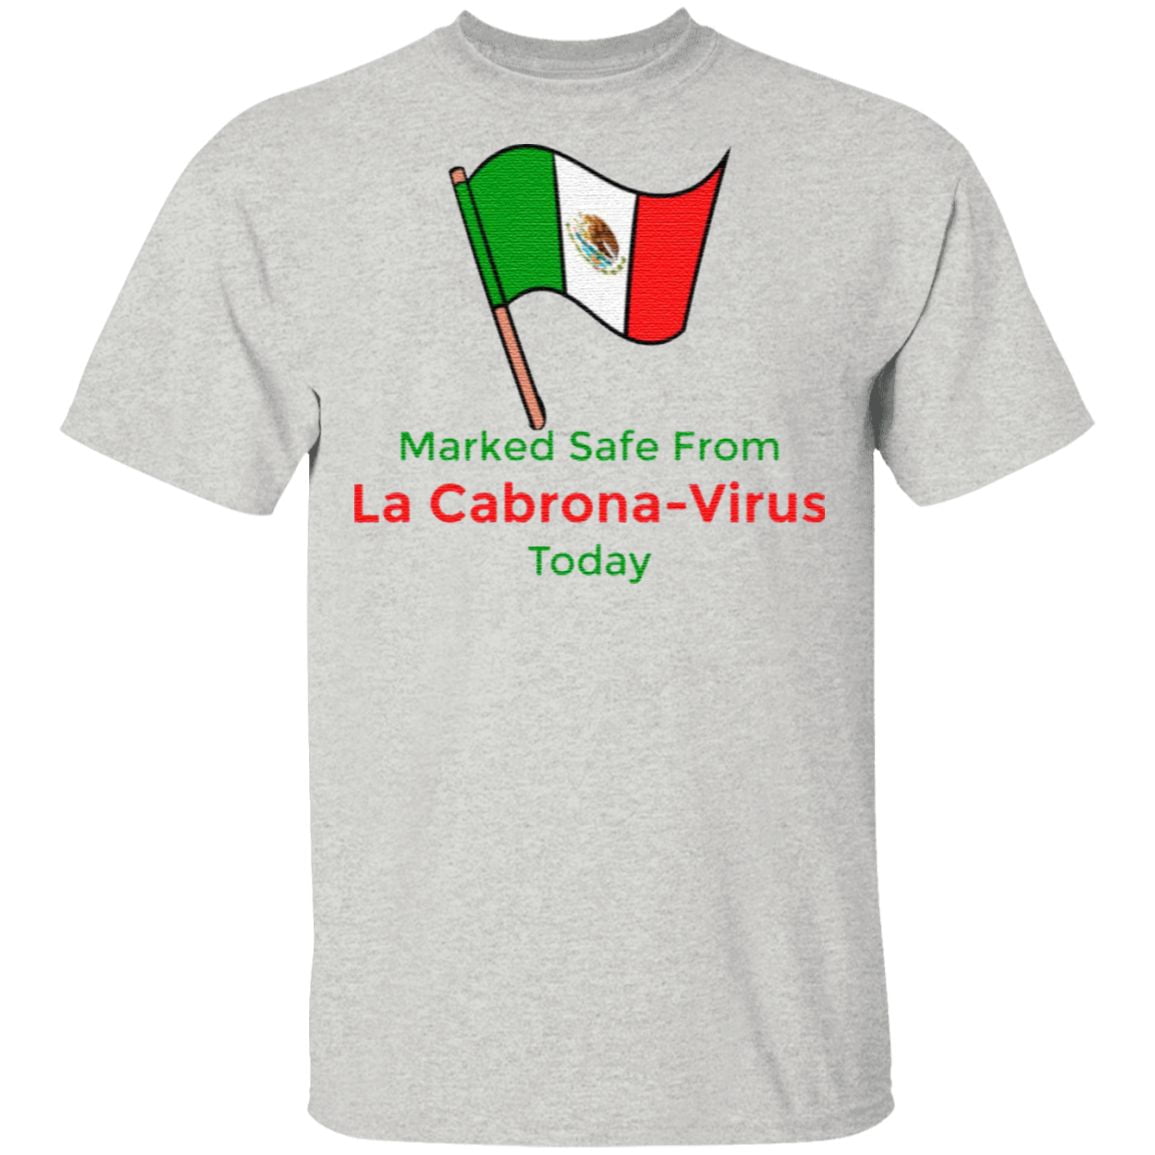 Marked Safe from La Cabrona Virus Today TShirt